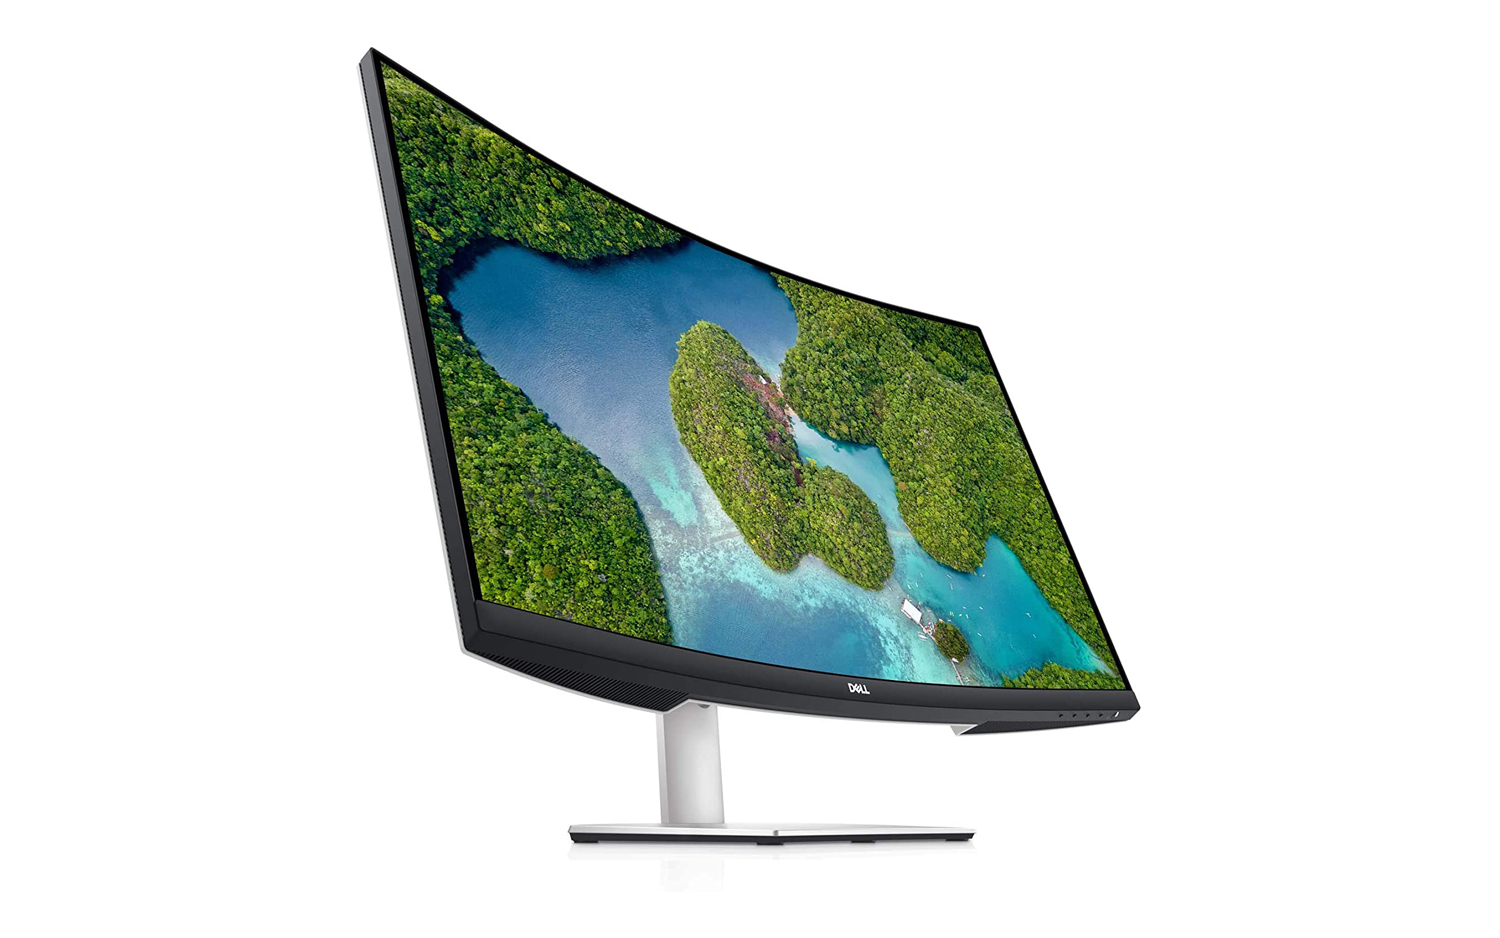 Best MacBook School Accessories: Dell 4K S3221QS Curved Display on White